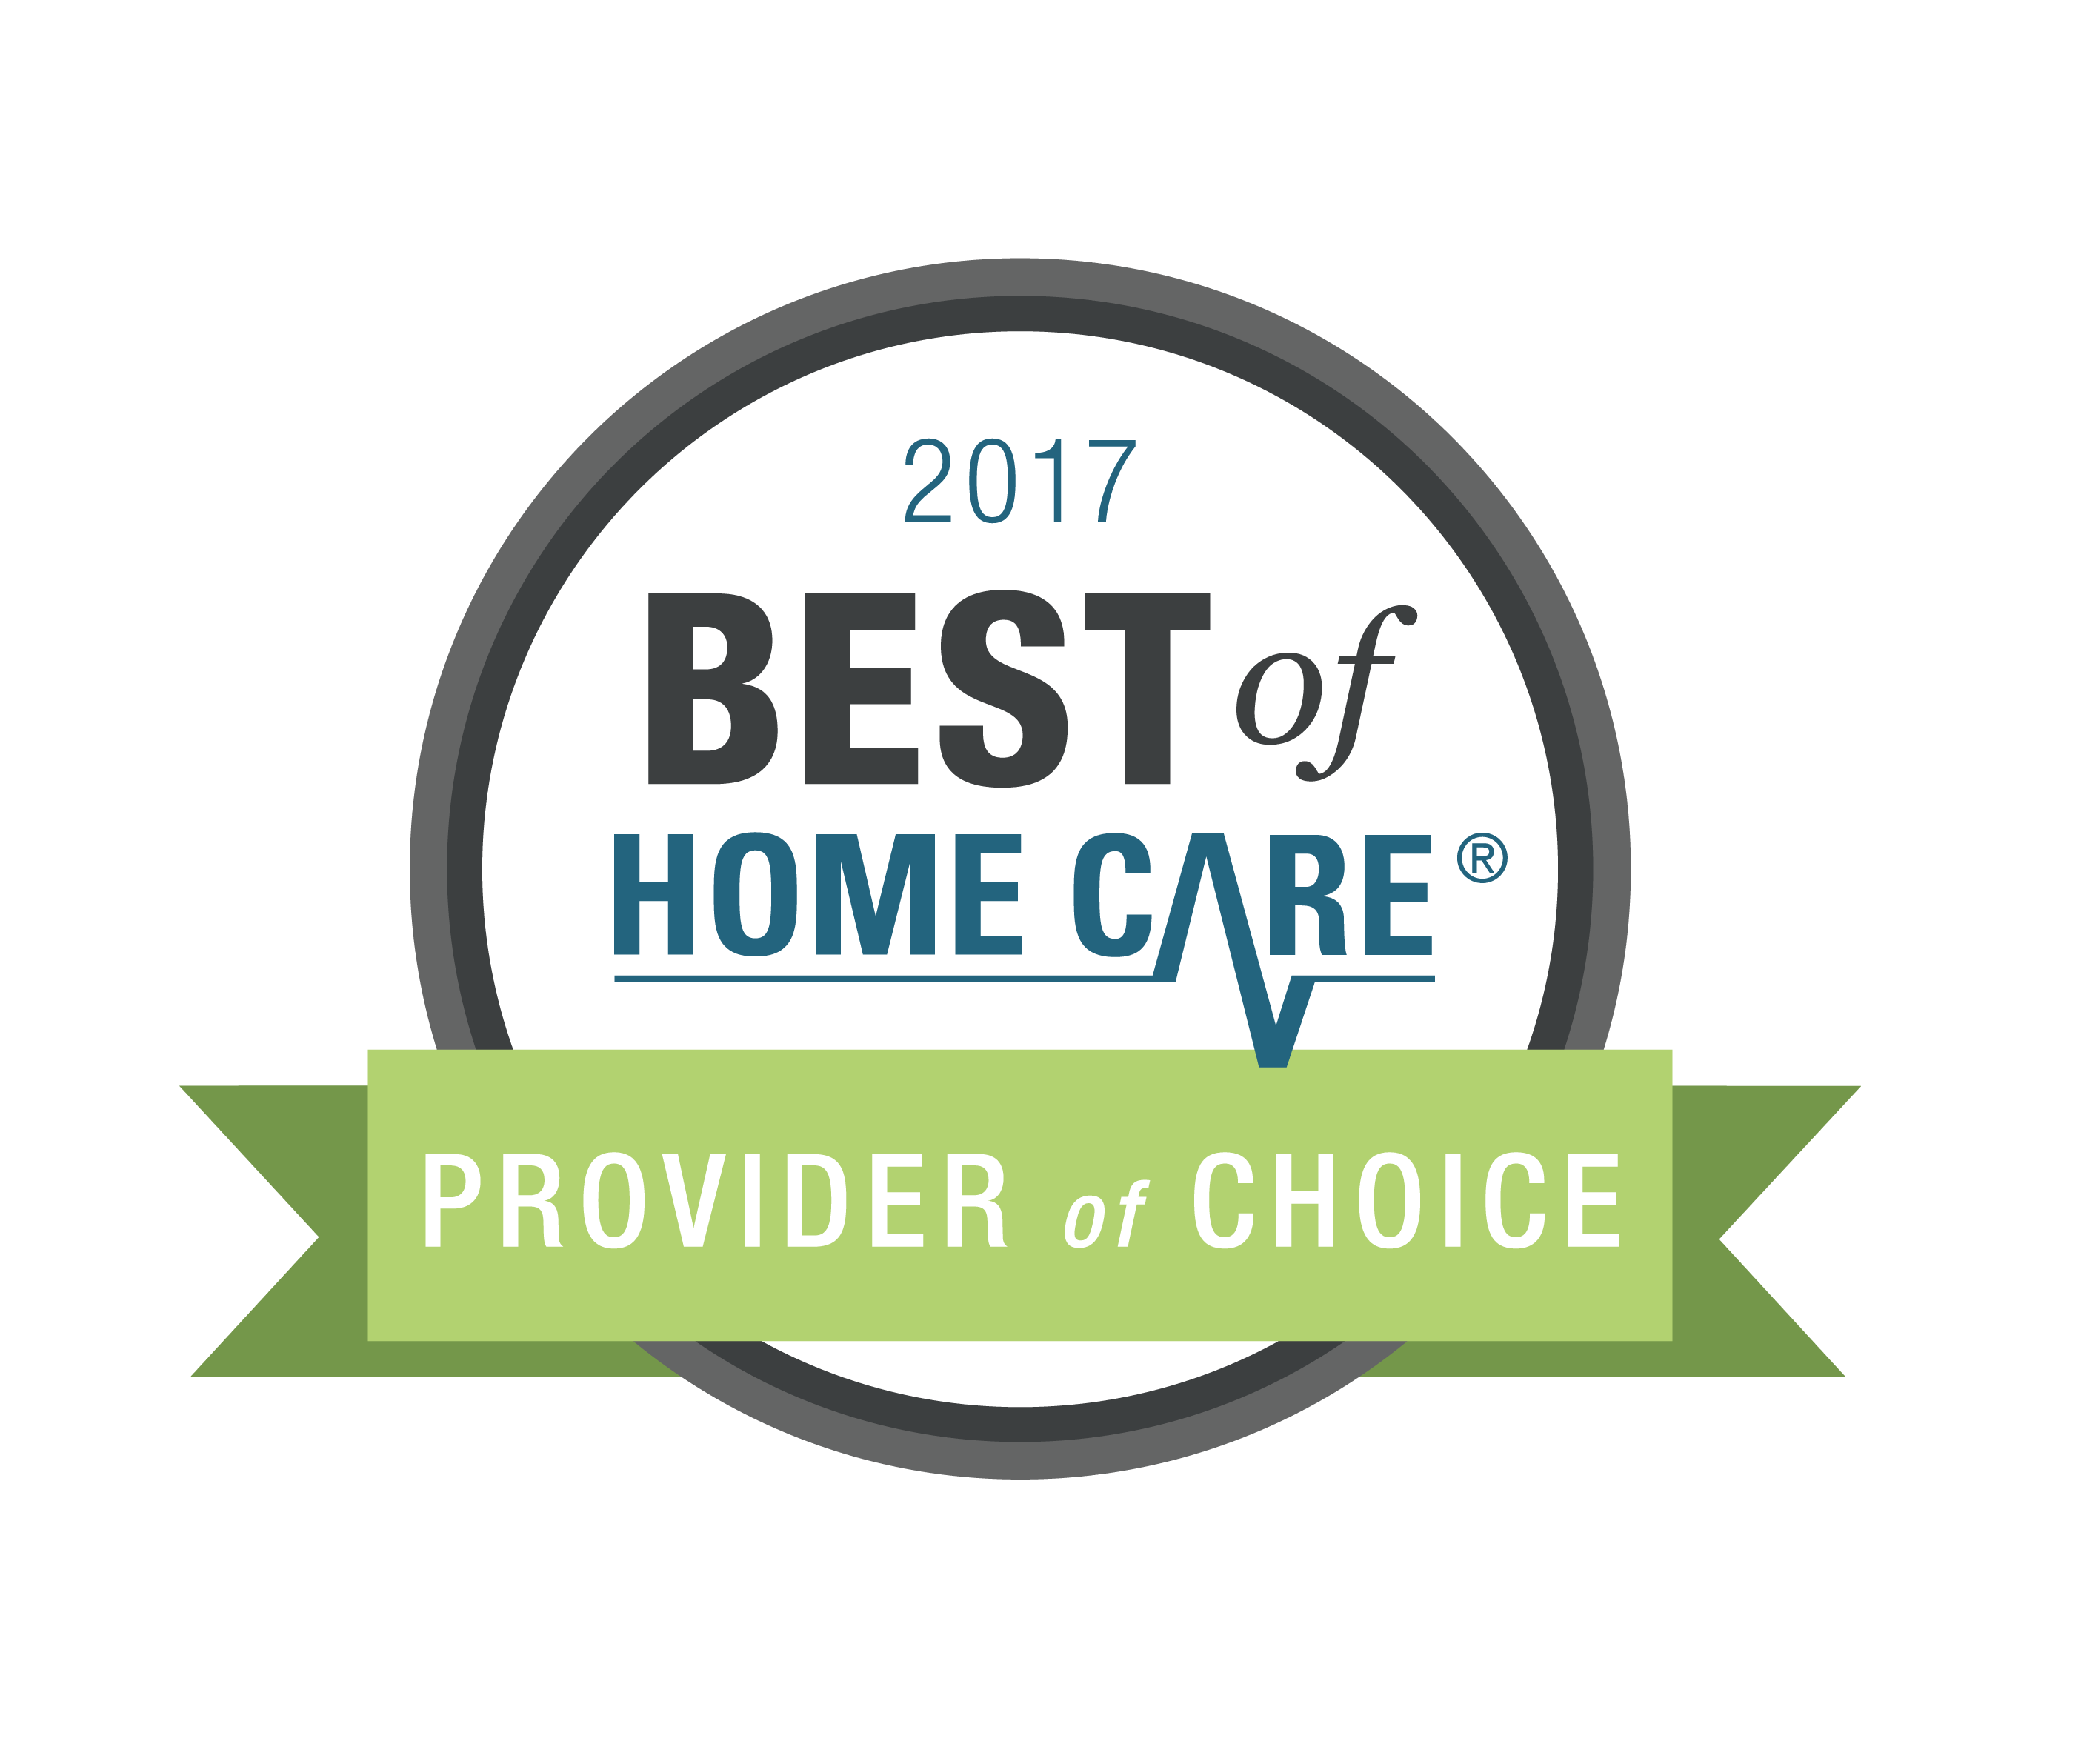 Danville Support Services wins Best of Home Care - Provider of Choice 2017